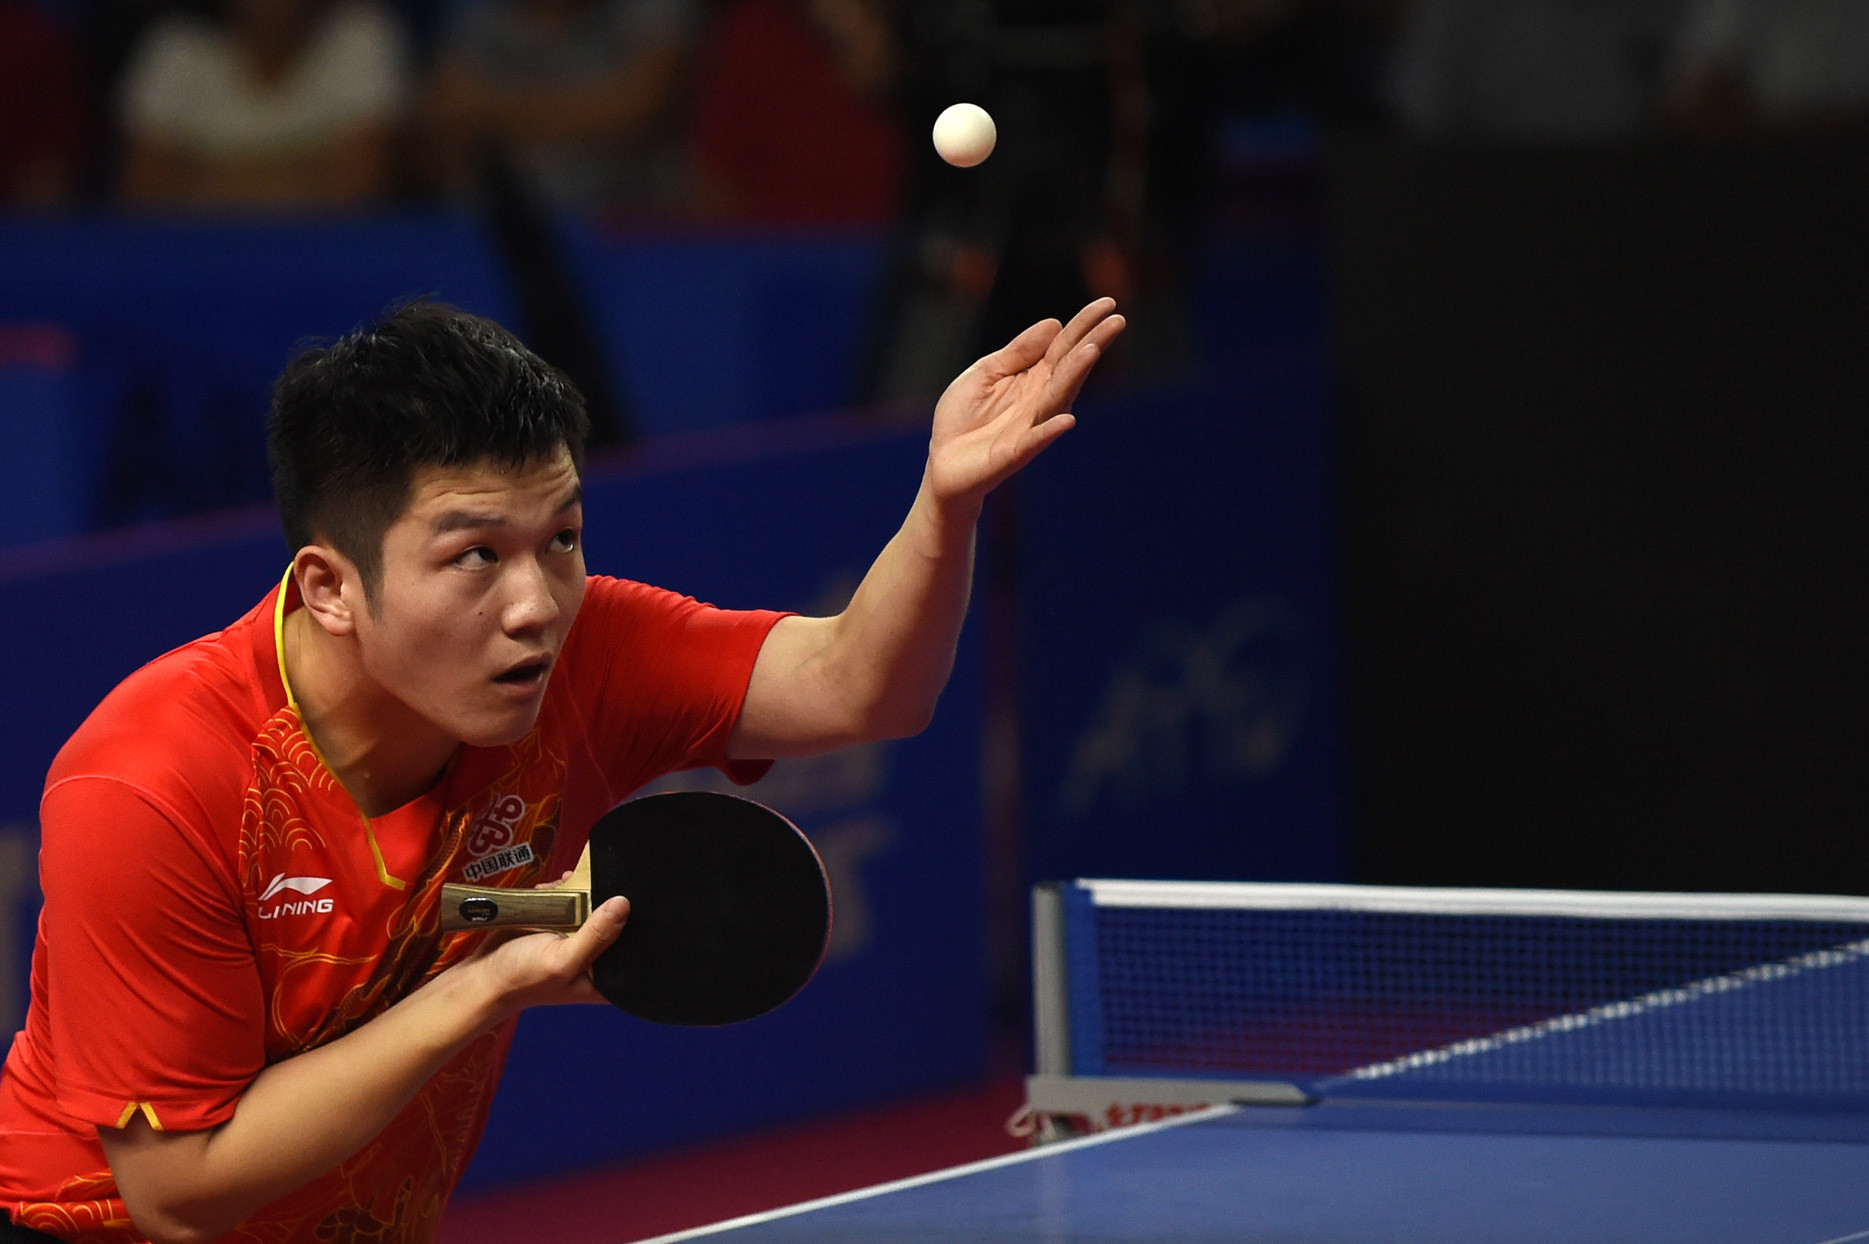 Fan Zhendong eased through his first match at the tournament ©Getty Images